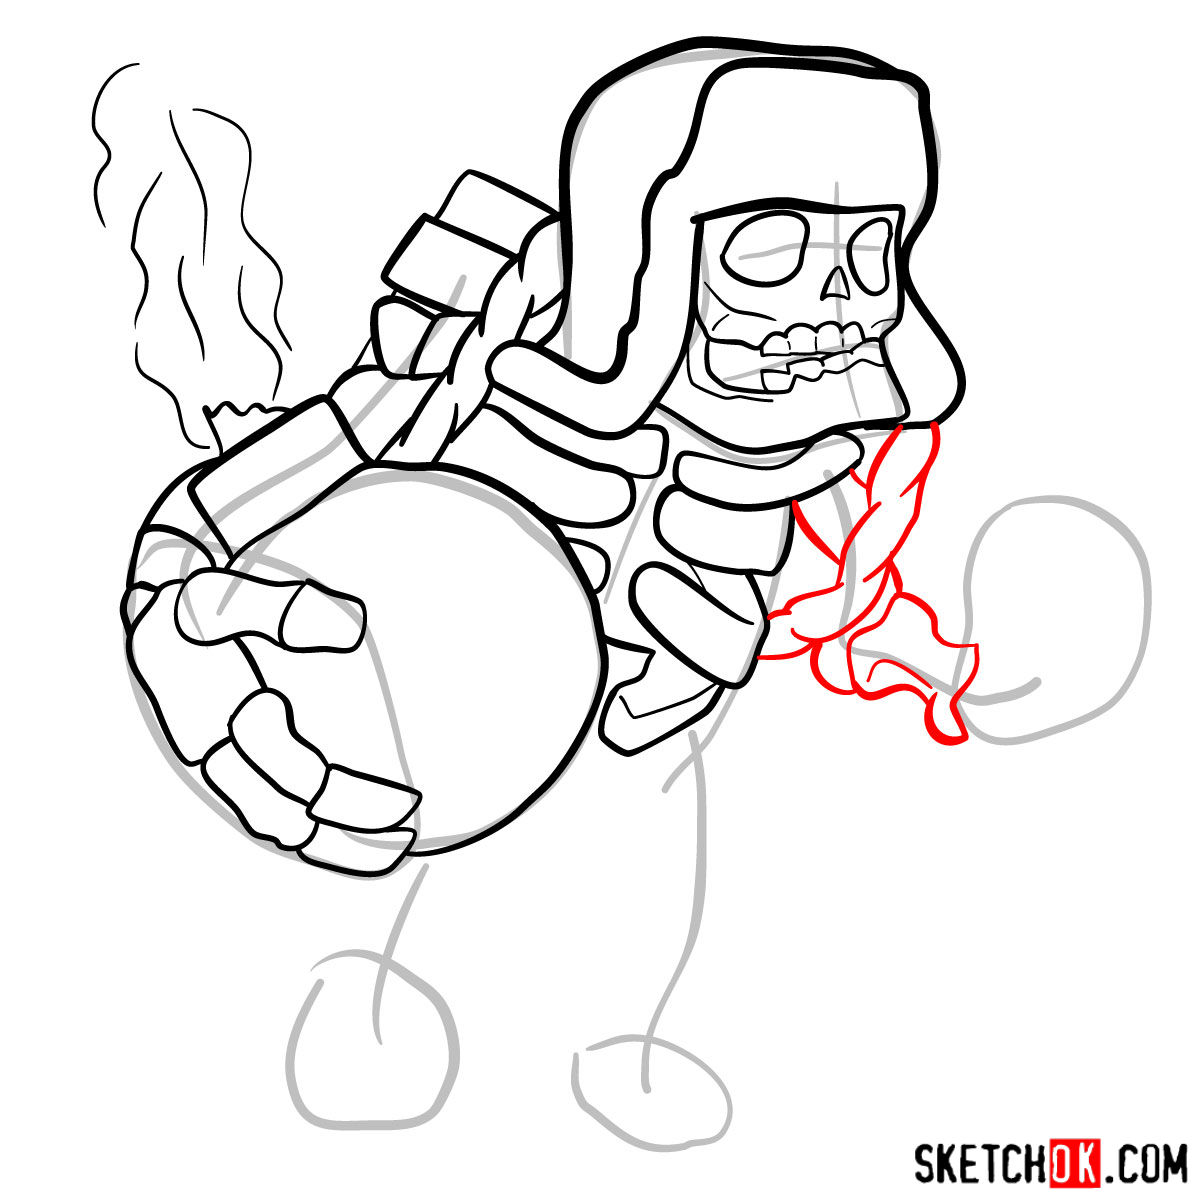 How to draw Giant Skeleton from Clash of Clans - step 08